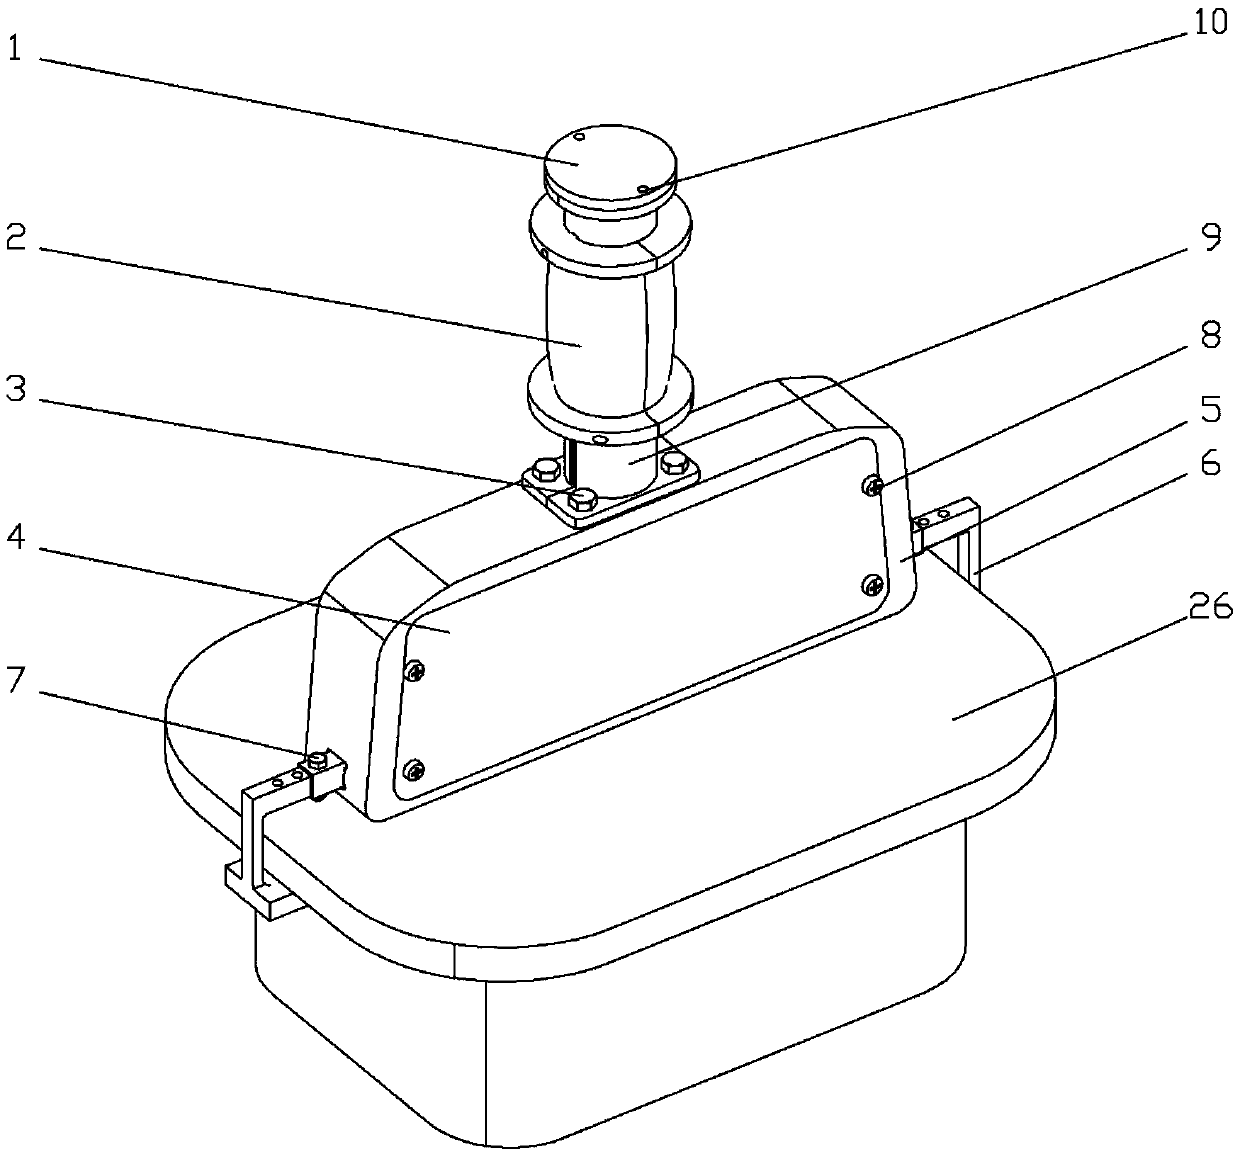 Box carrying clamp